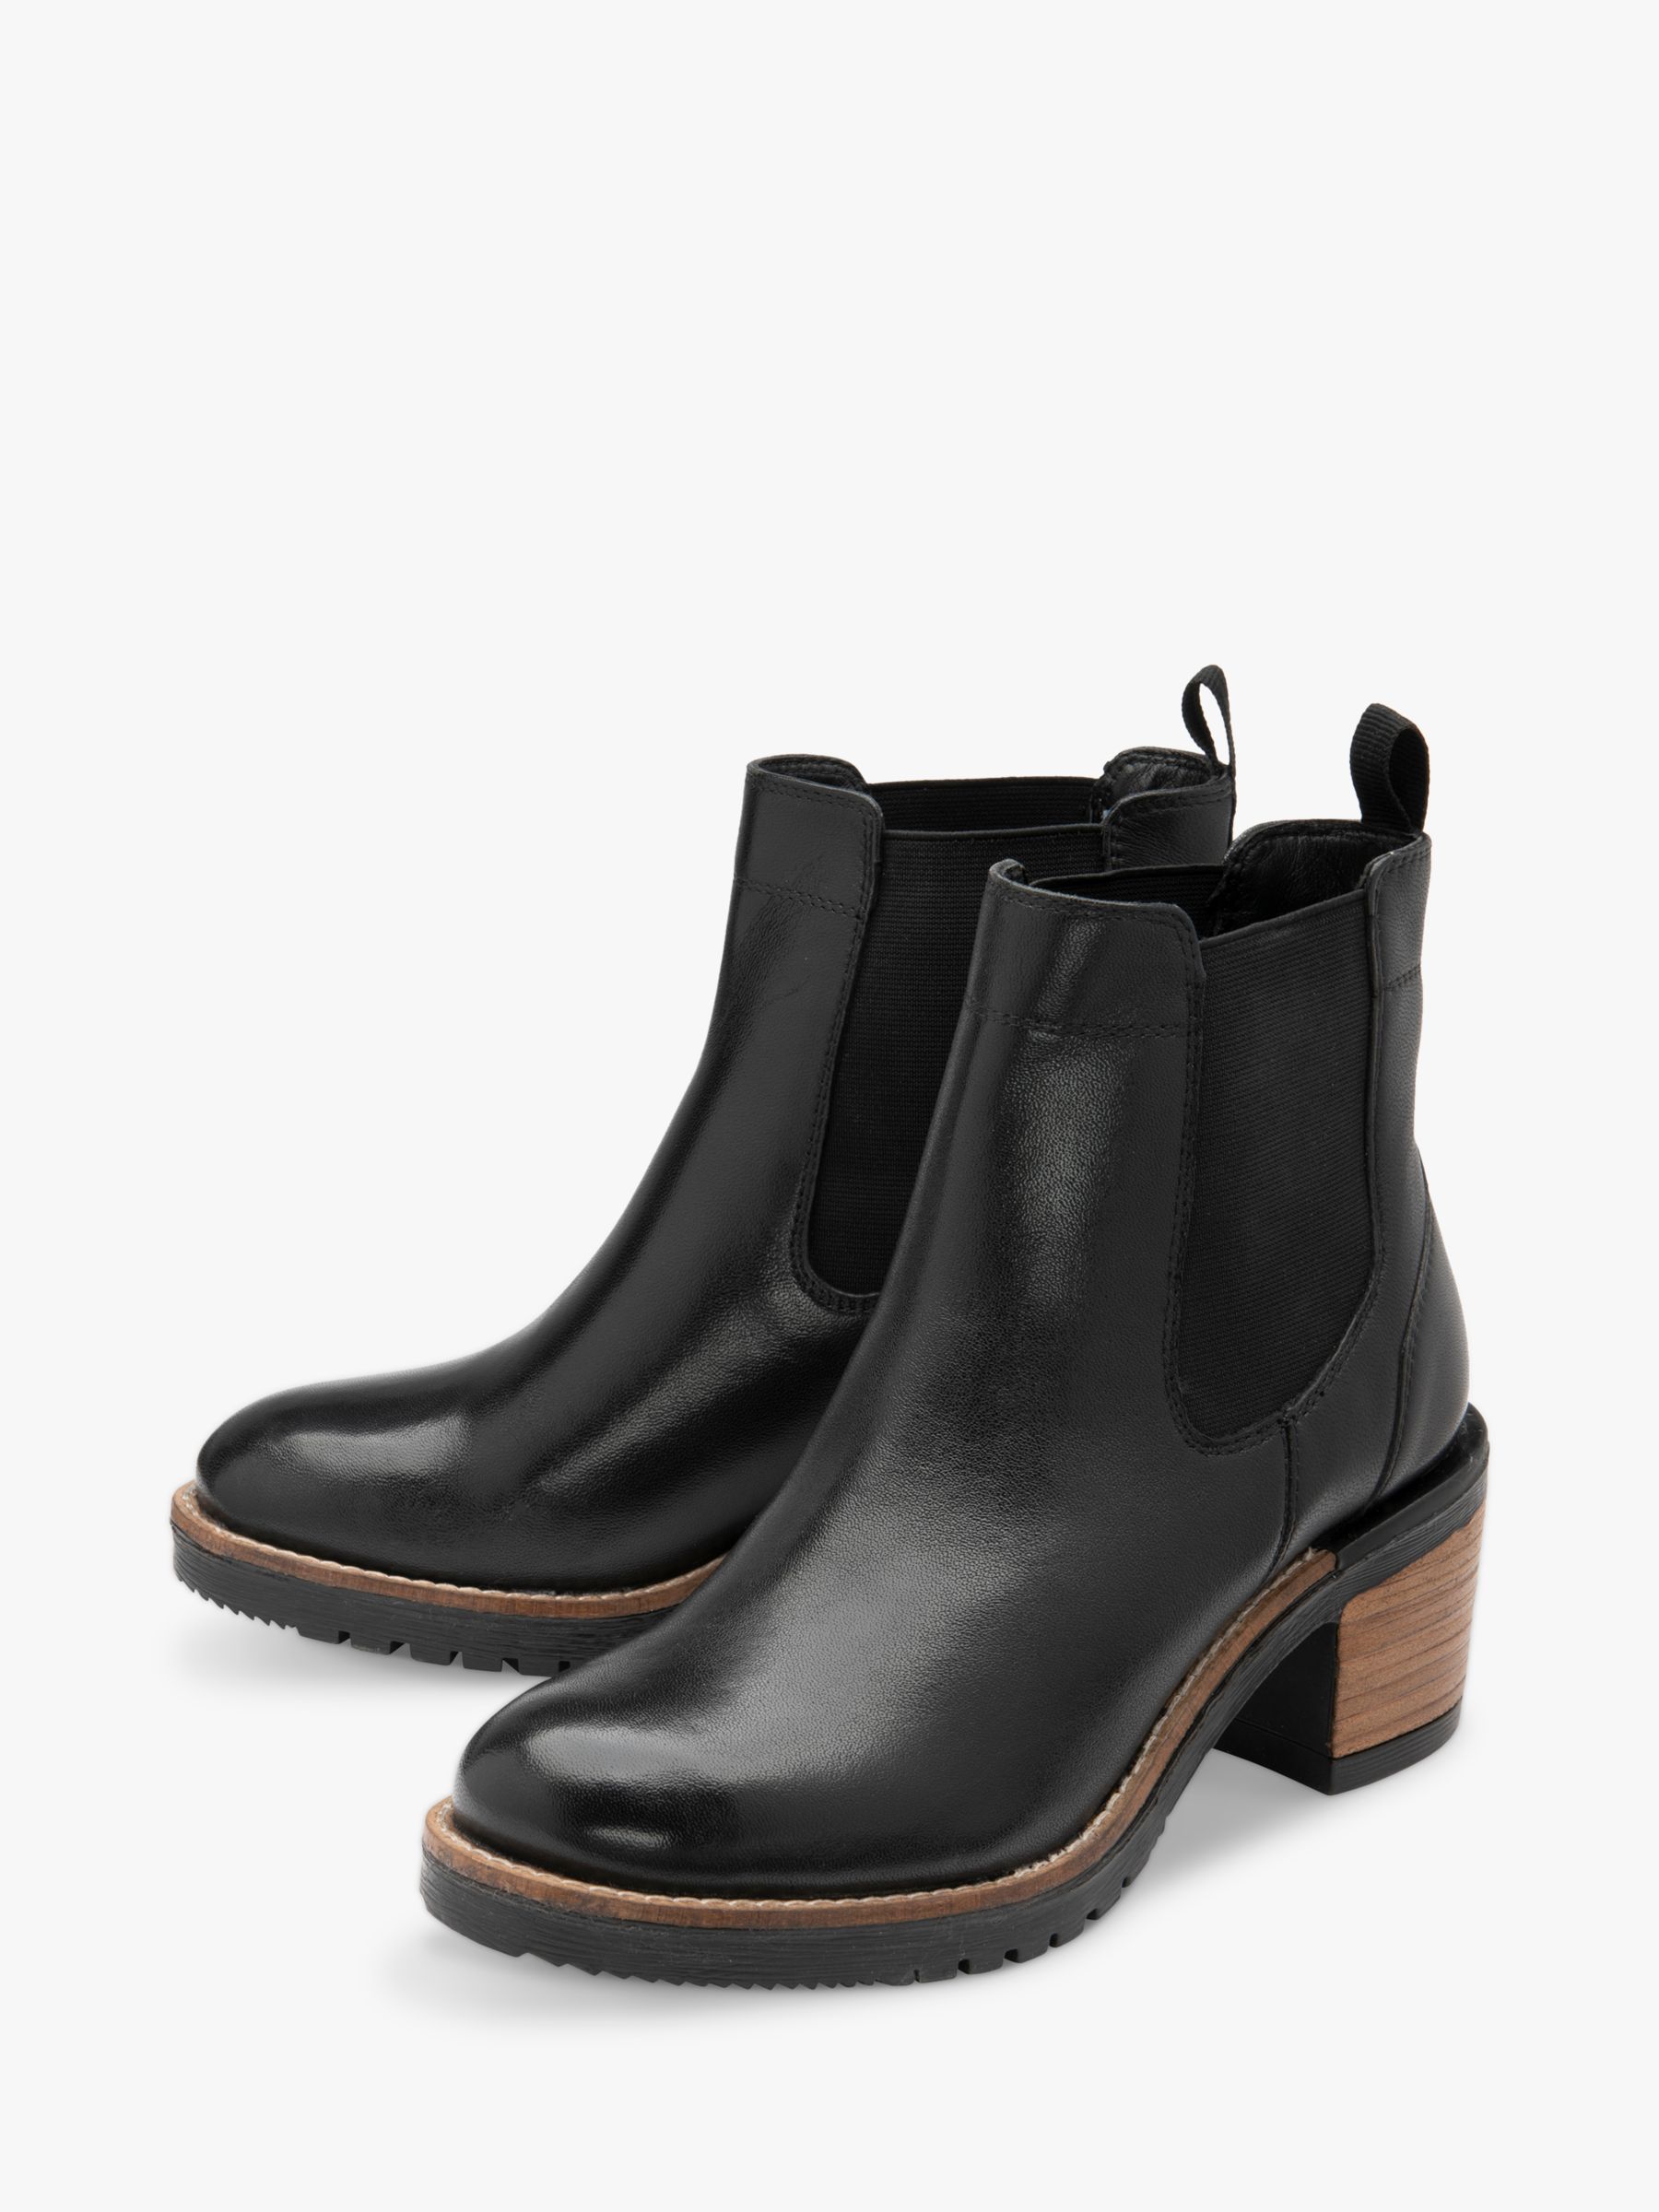 Buy Ravel Bray Leather Block Heel Ankle Boots Online at johnlewis.com